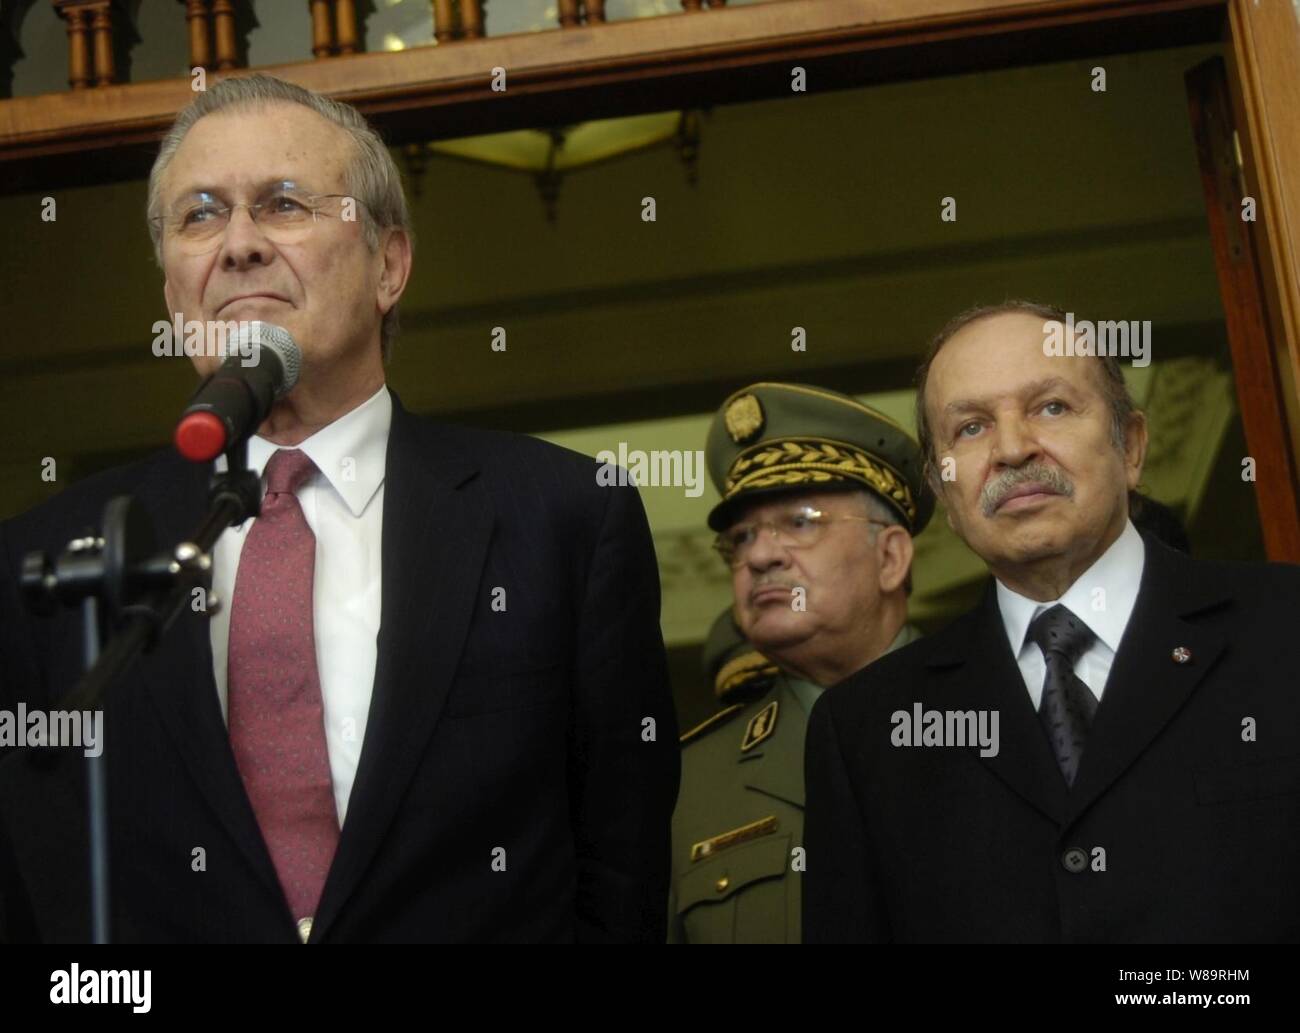 Secretary of Defense Donald H. Rumsfeld and Algerian President Abdelaziz Bouteflika listen to a reporter's question during a press availability on the steps of the Presidential Palace in Algiers, Algeria, on Feb. 12, 2006.  Rumsfeld met with delegations from the Mediterranean Dialogue countries of Algeria, Egypt, Israel, Jordan, Mauritania, Morocco and Tunisia earlier at the NATO Ministerial in Taormina, Sicily.  Rumsfeld is meeting with Bouteflika in Algiers to continue those talks and discuss regional security issues. Stock Photo